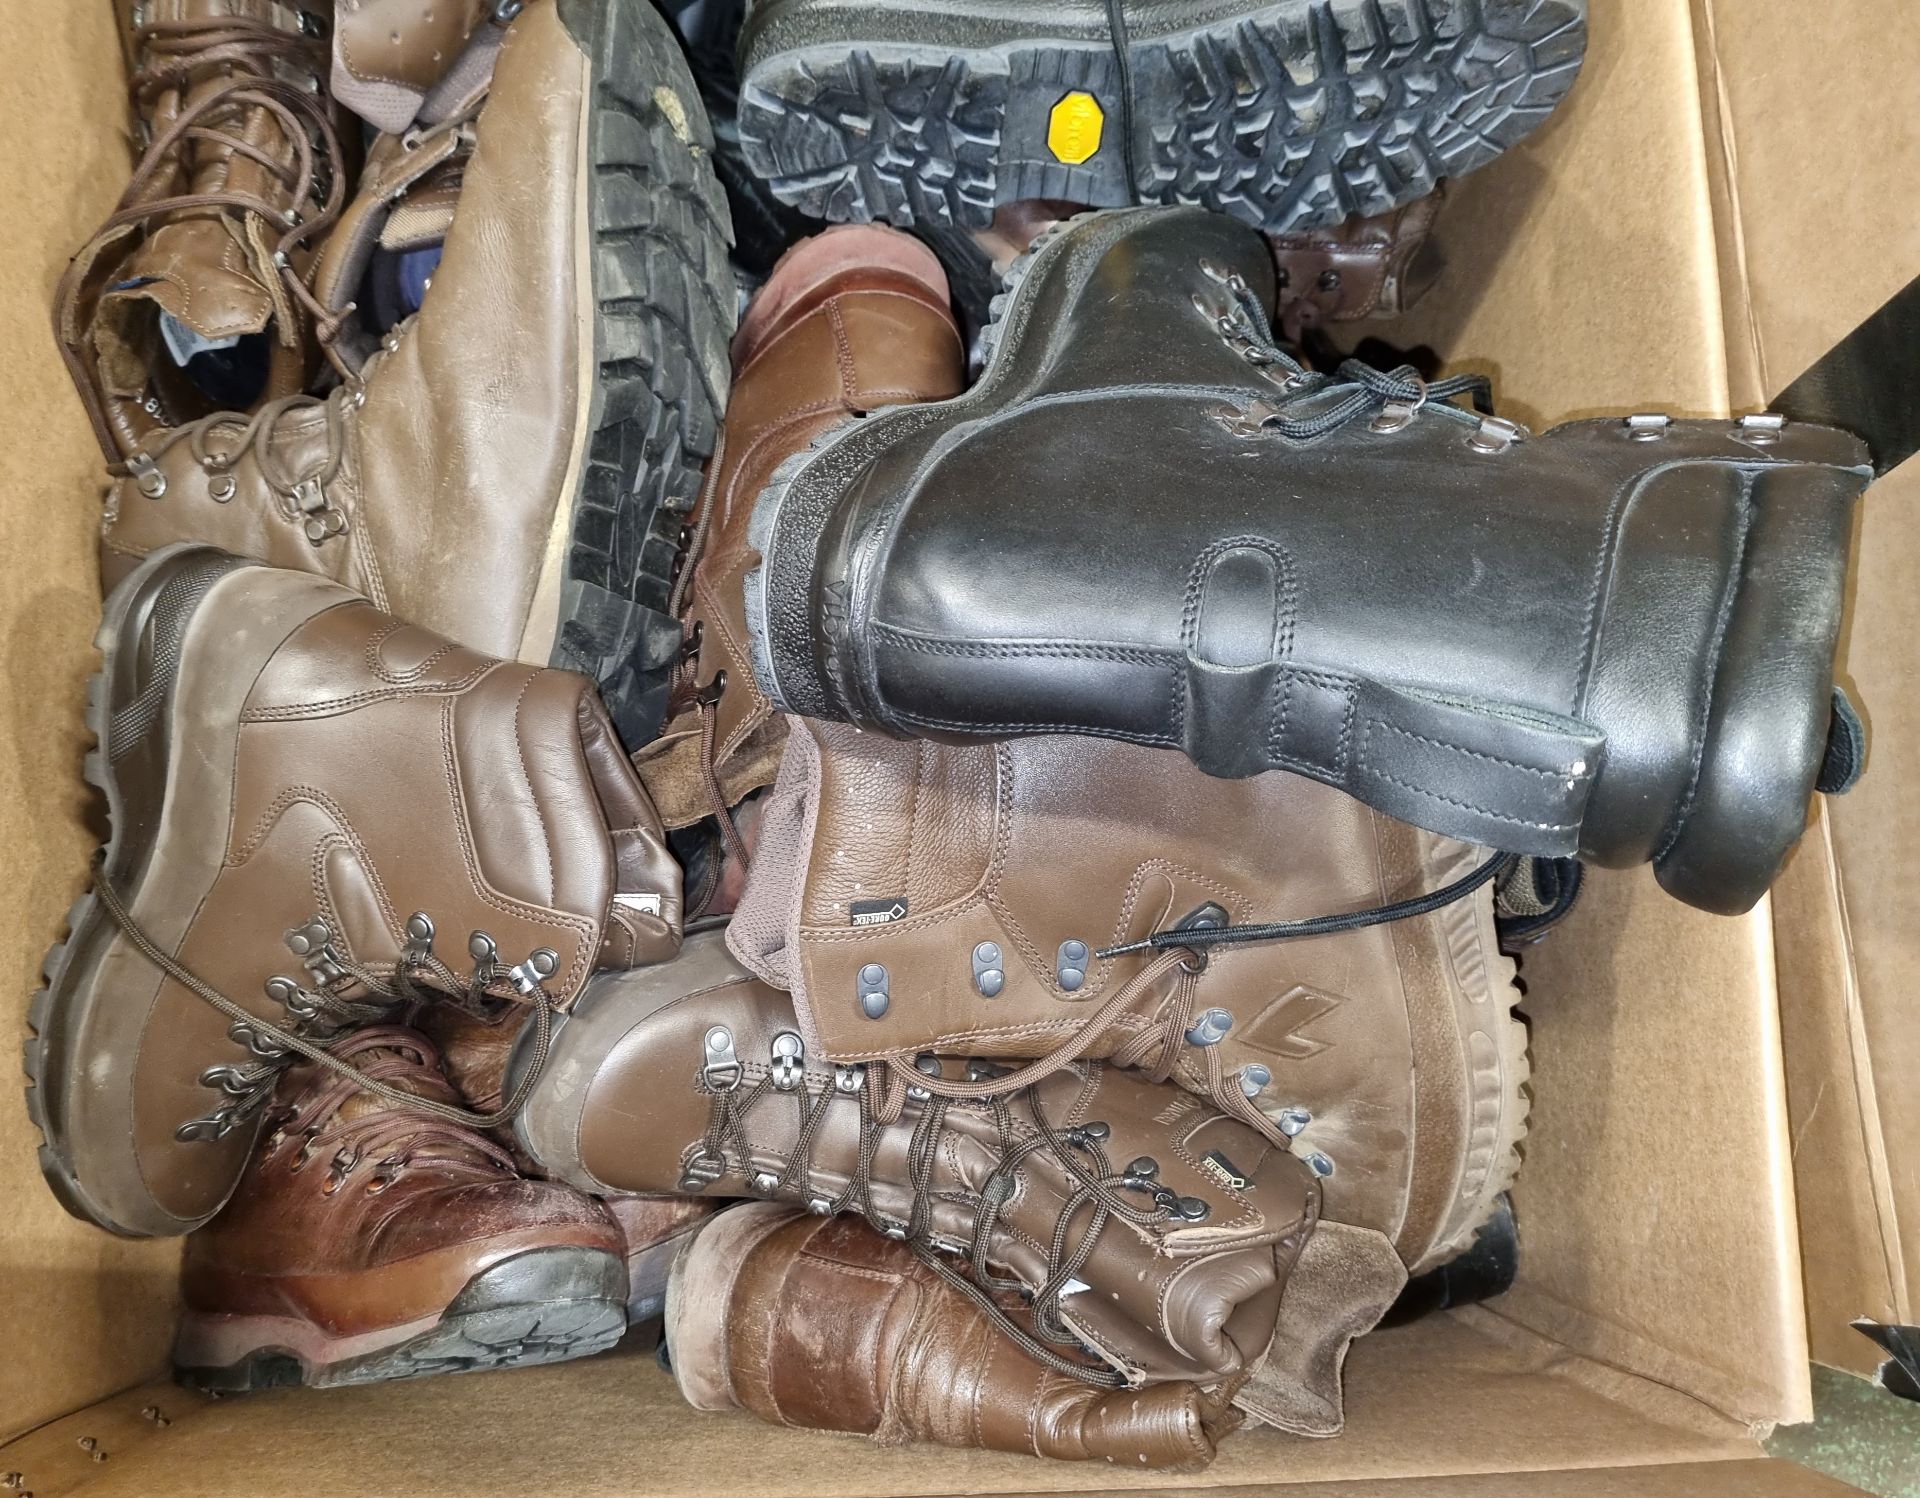 30x pairs of Various boots - Magnum Haix YDS - mixed grades and sizes - Image 4 of 4